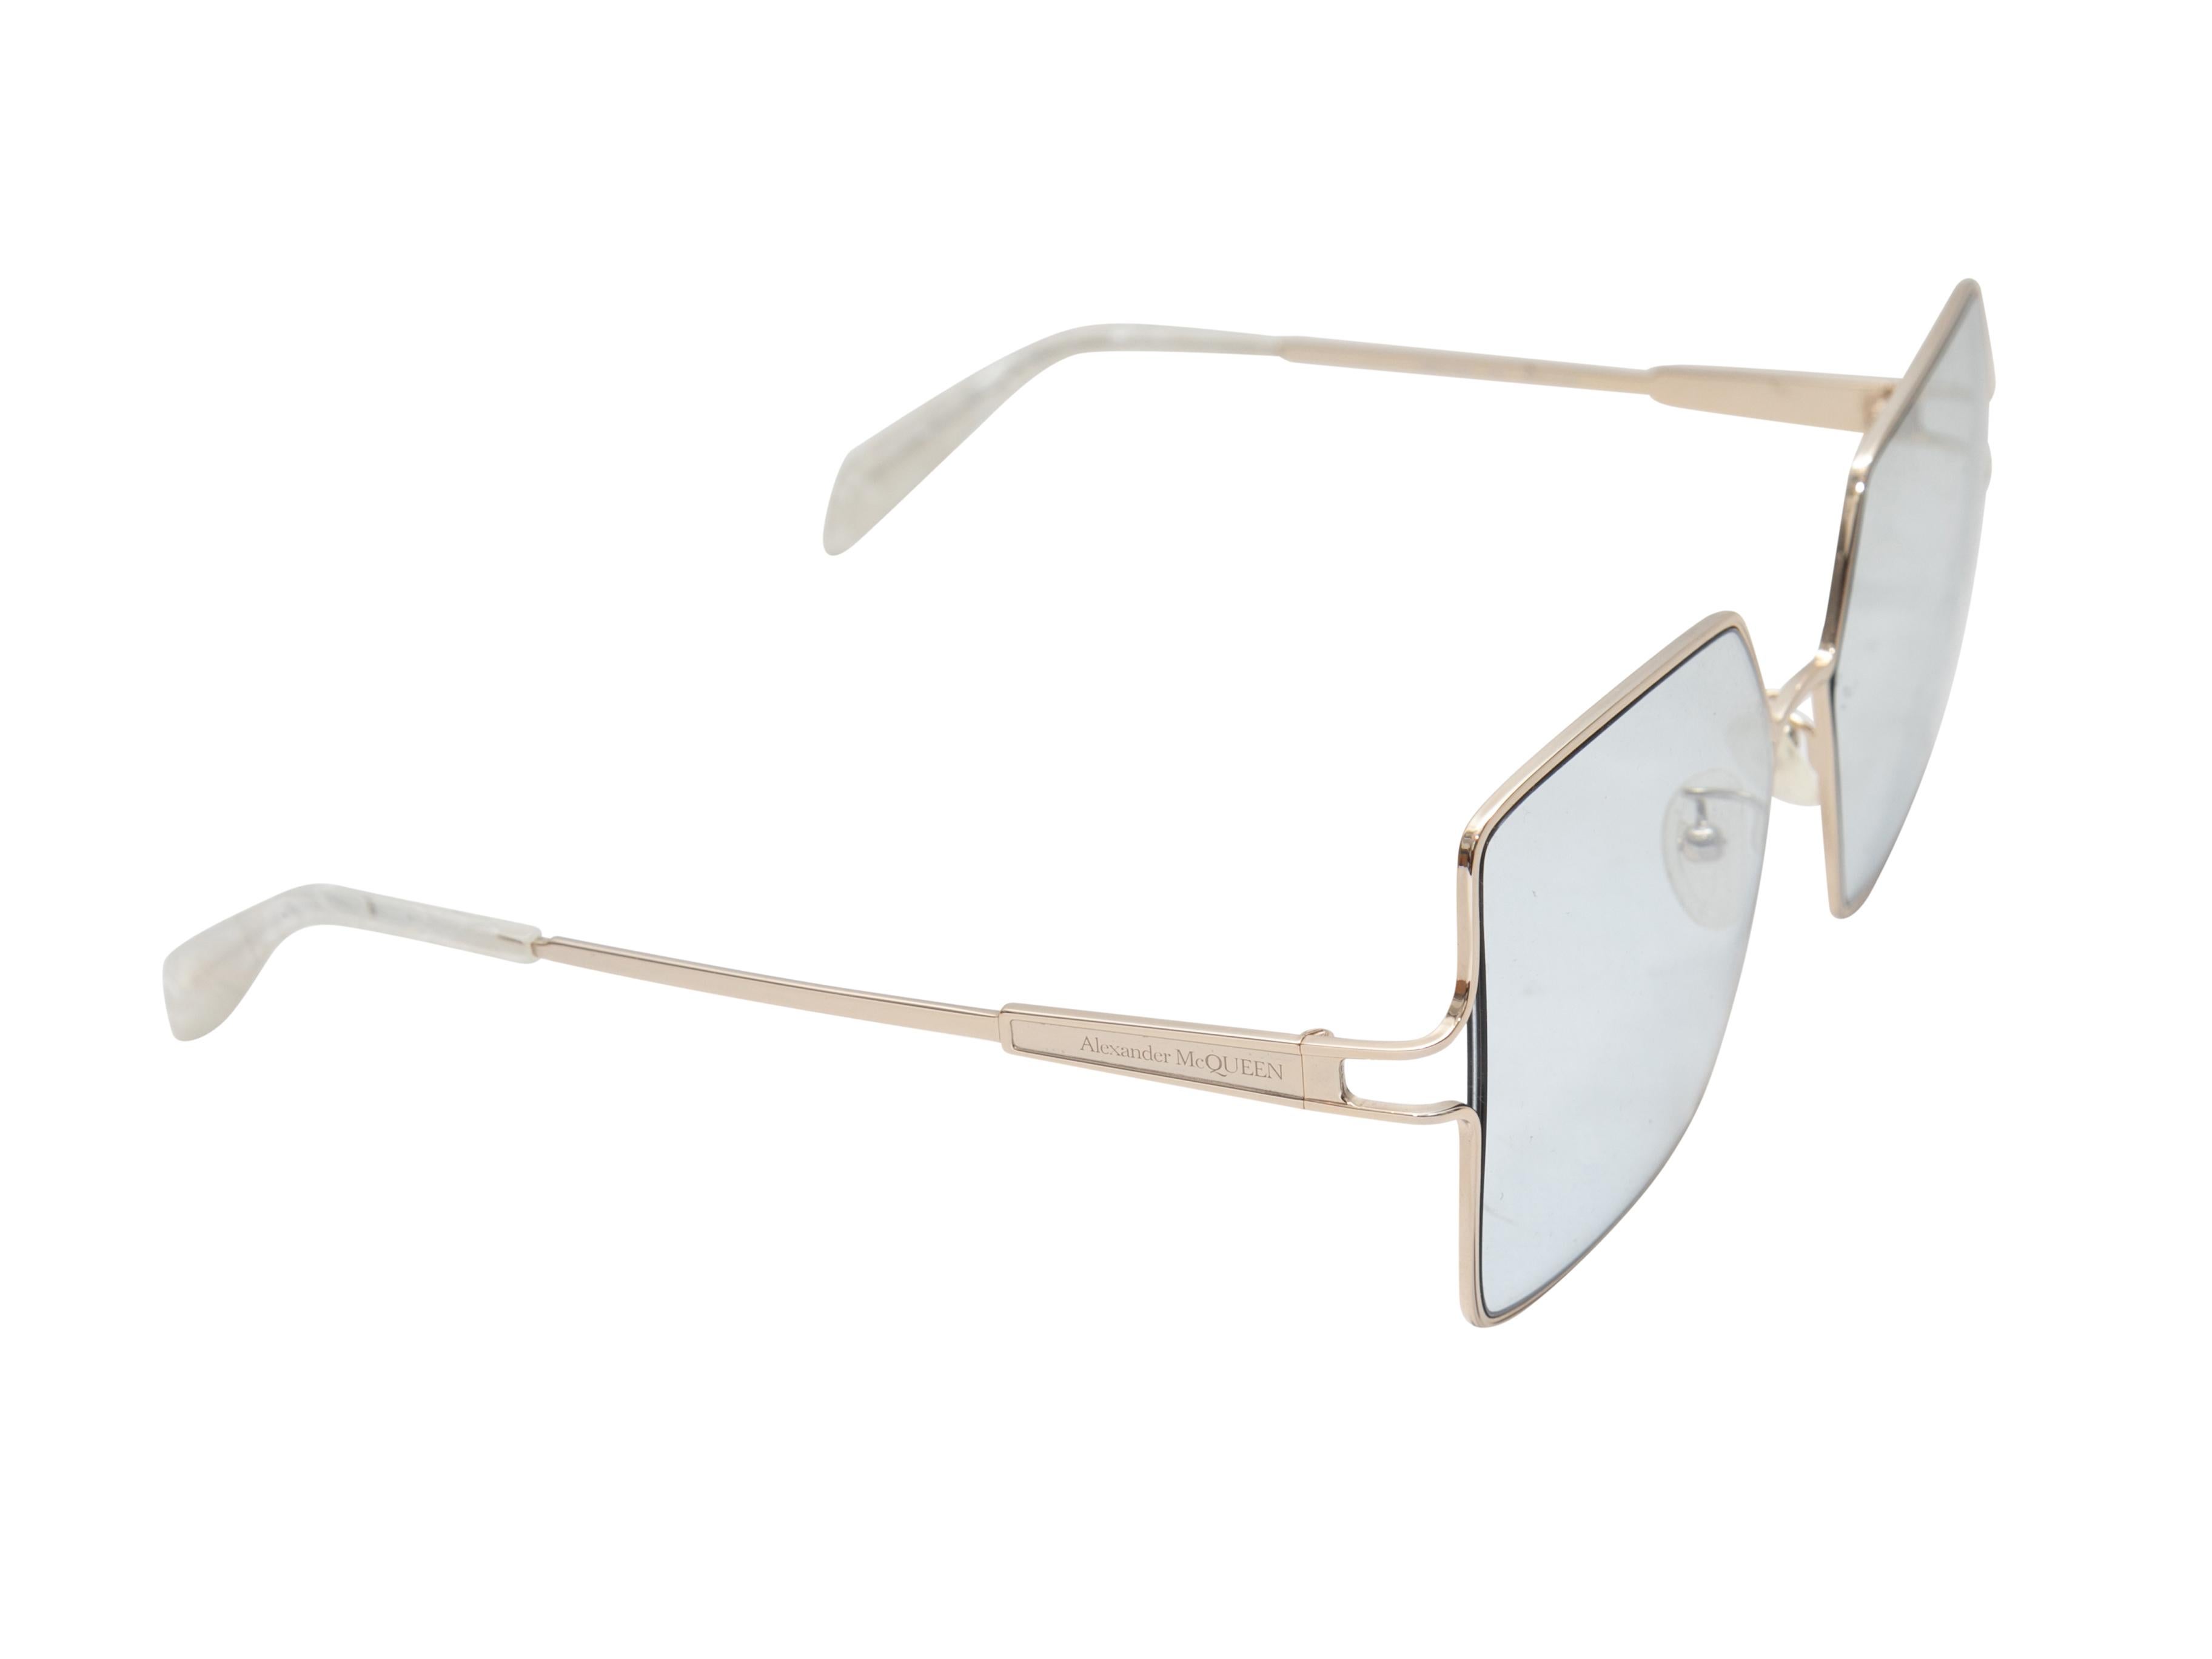 Gold-tone metal square sunglasses by Alexander McQueen. Blue tinted lenses. 2.25